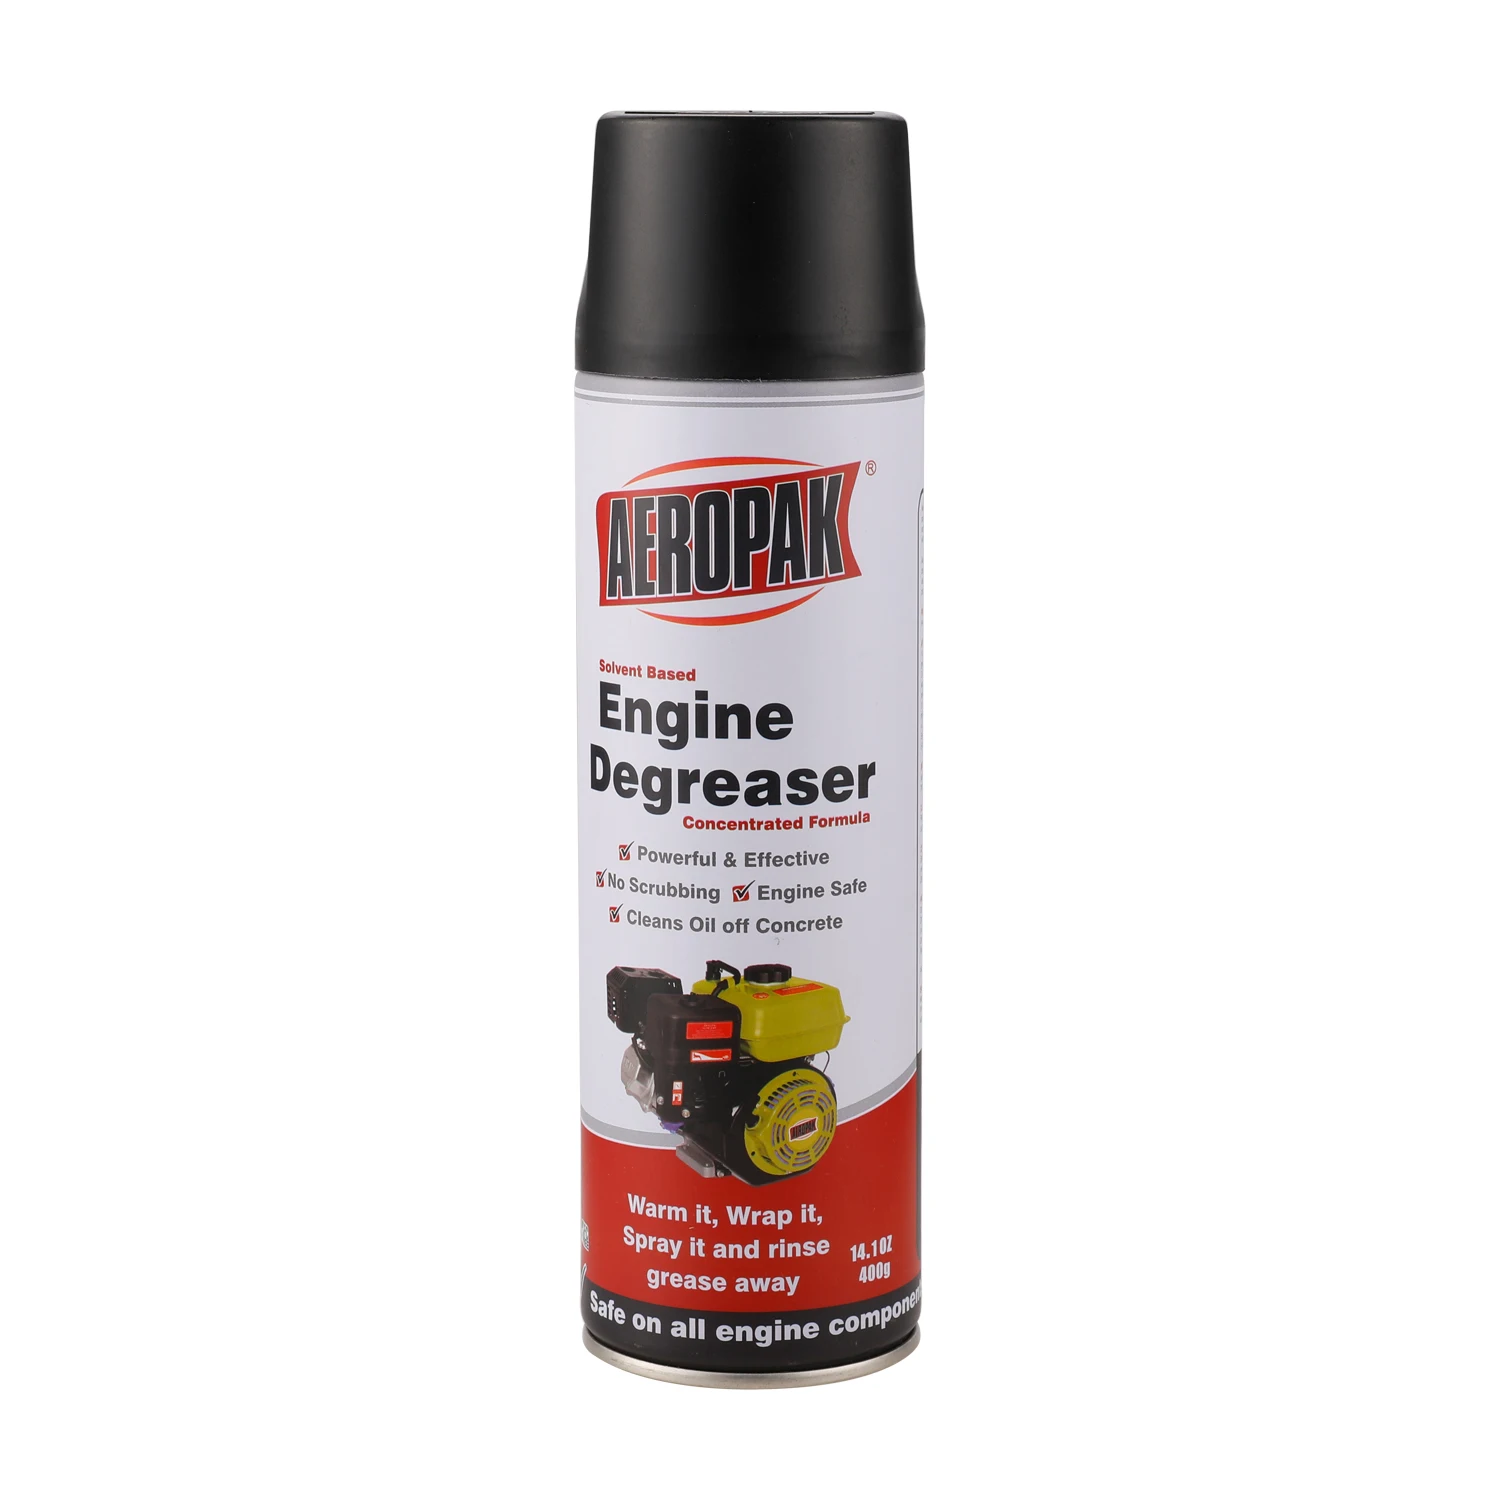 strong powerful cleaning engine surface degreaser